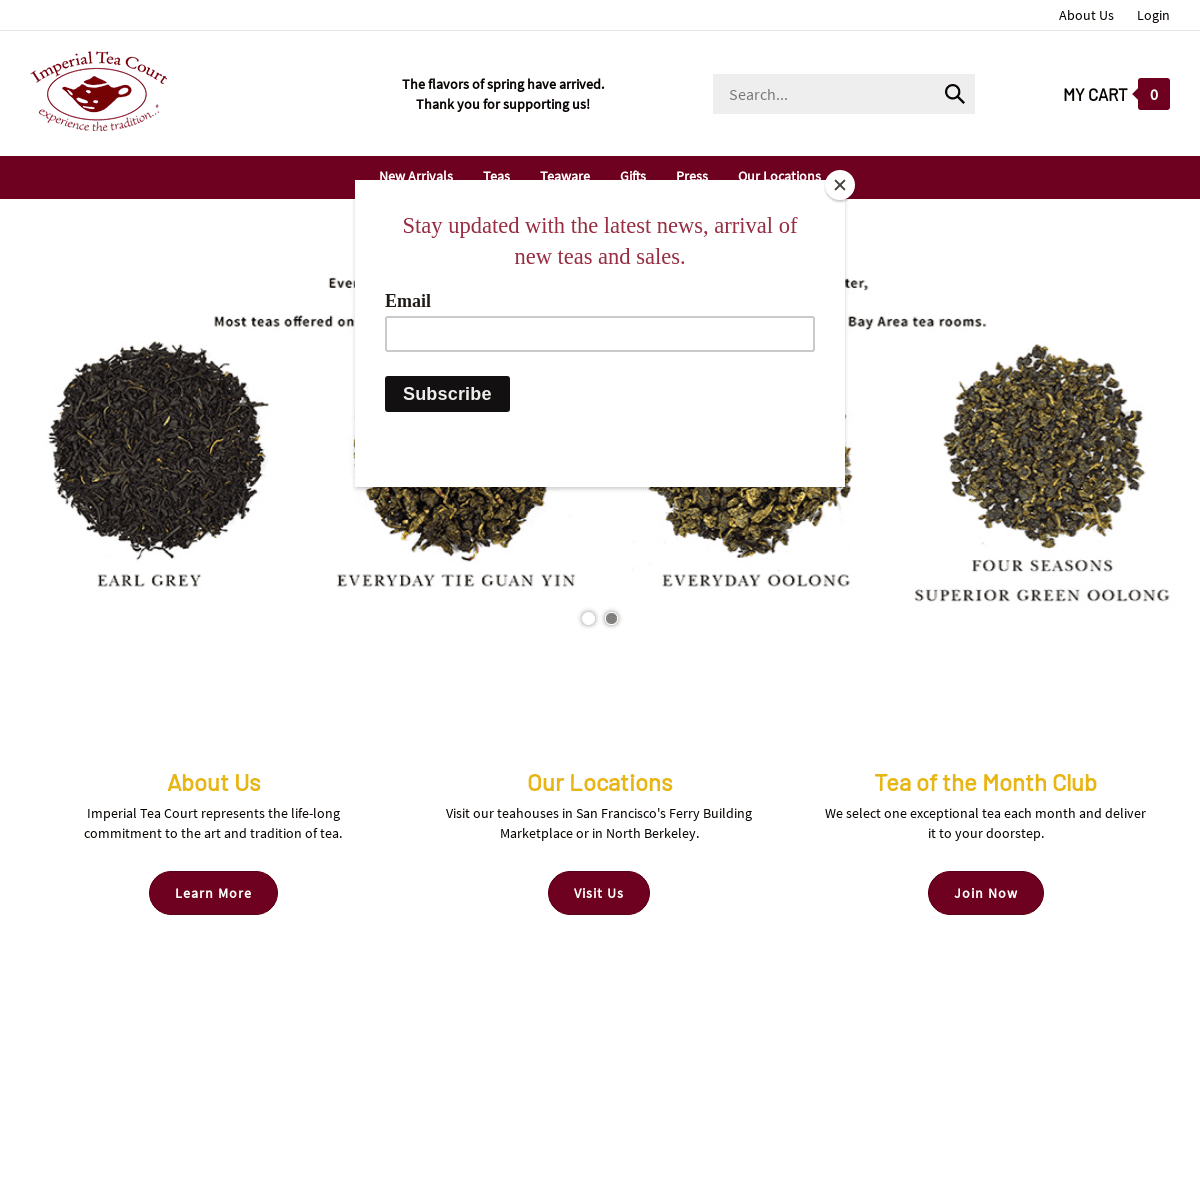 A complete backup of https://imperialtea.com